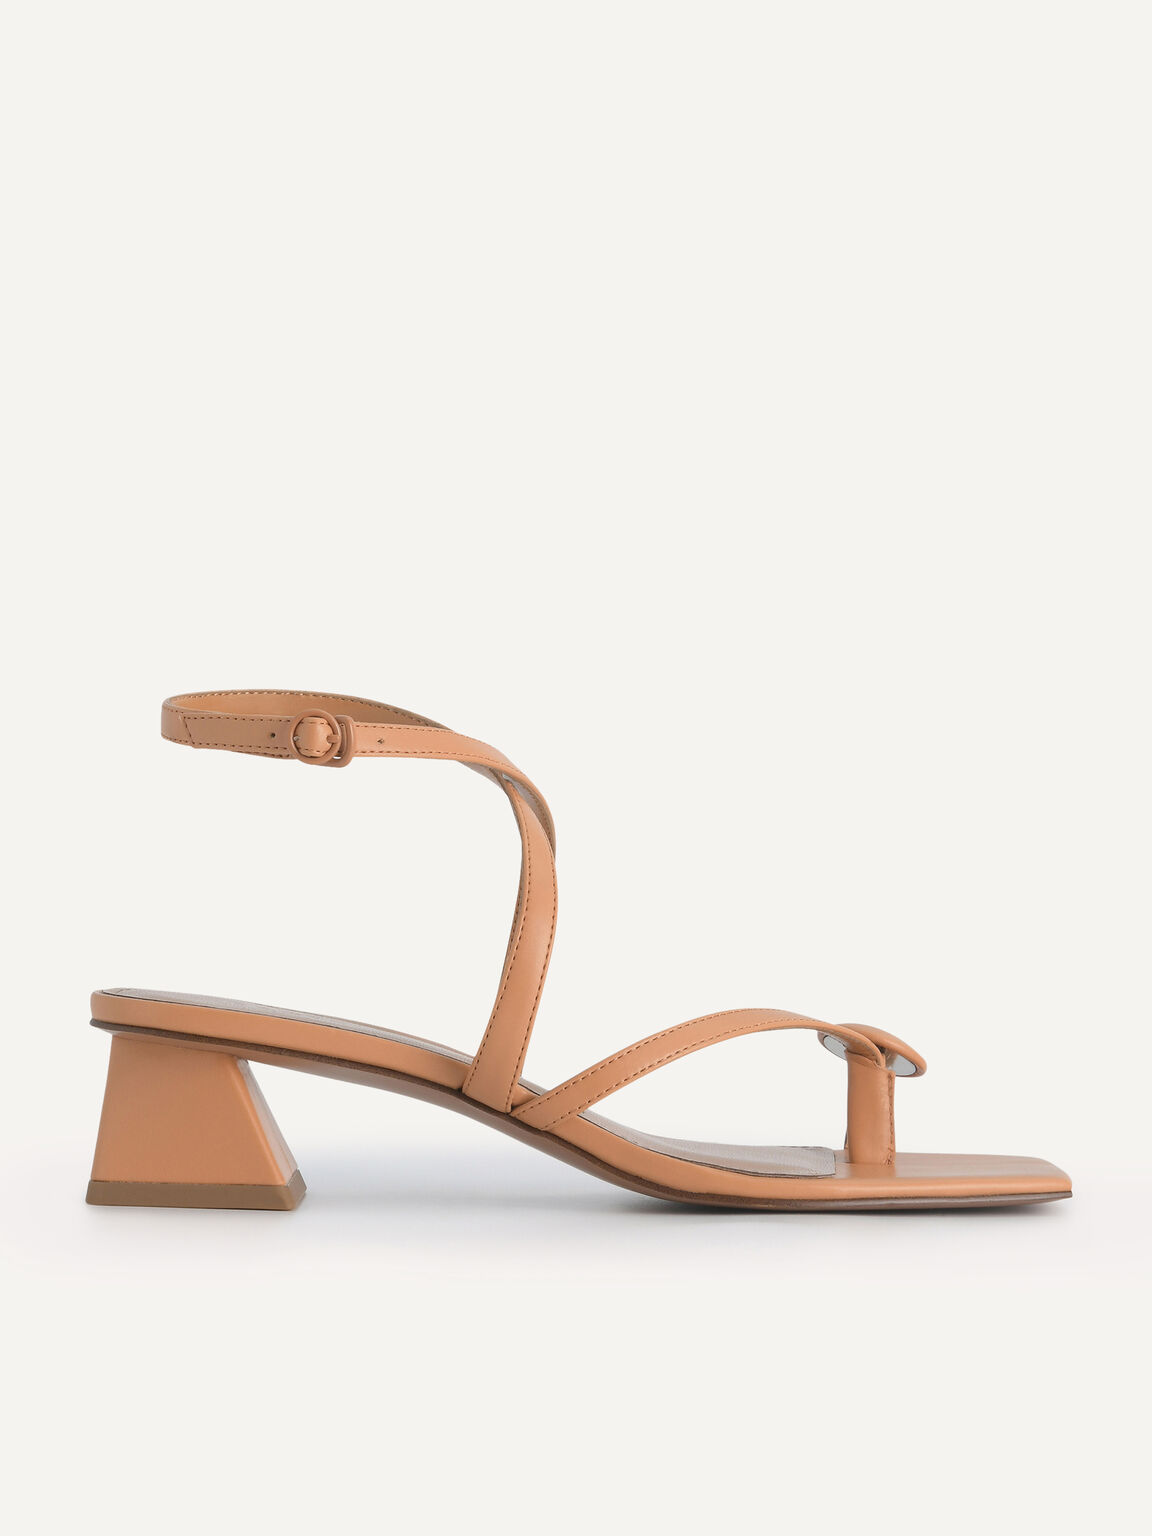 Strappy Toe-Loop Heeled Sandals, Camel